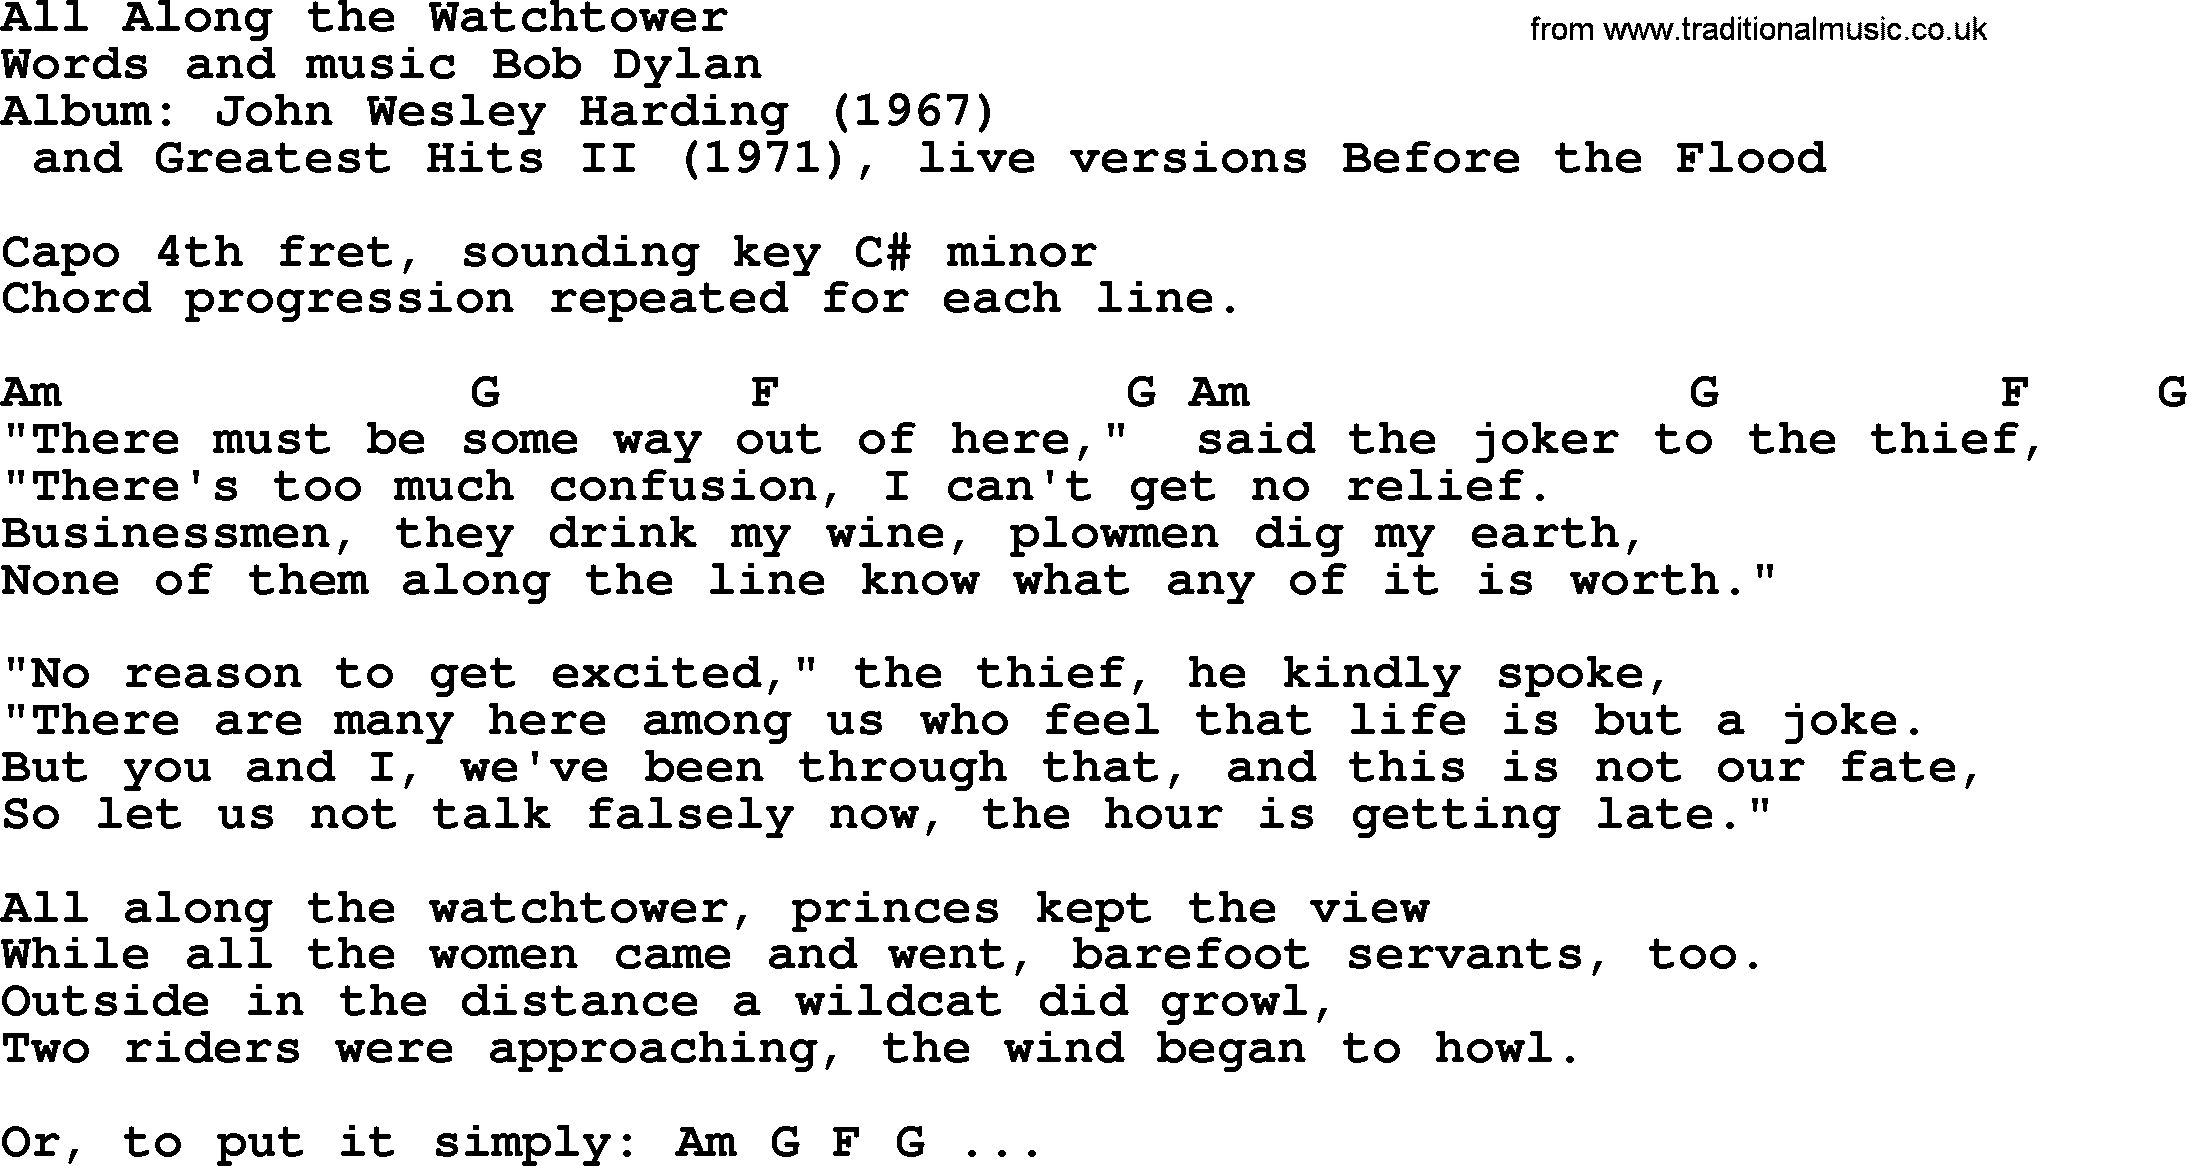 Bob Dylan song, lyrics with chords - All Along the Watchtower